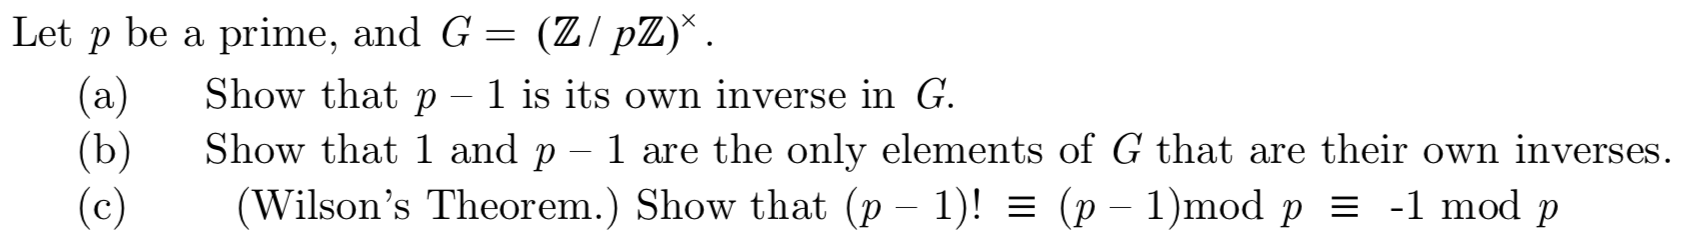 prime, and G = (Z/pZ)*
Let p be a
Show that p
(a)
(b)
(c)
1 is its own inverse in G.
Show that 1 and p - 1 are the only elements of G that are their own inverses
(Wilson's Theorem.) Show that (p - 1)! = (p
- 1)mod p = -1 mod p
